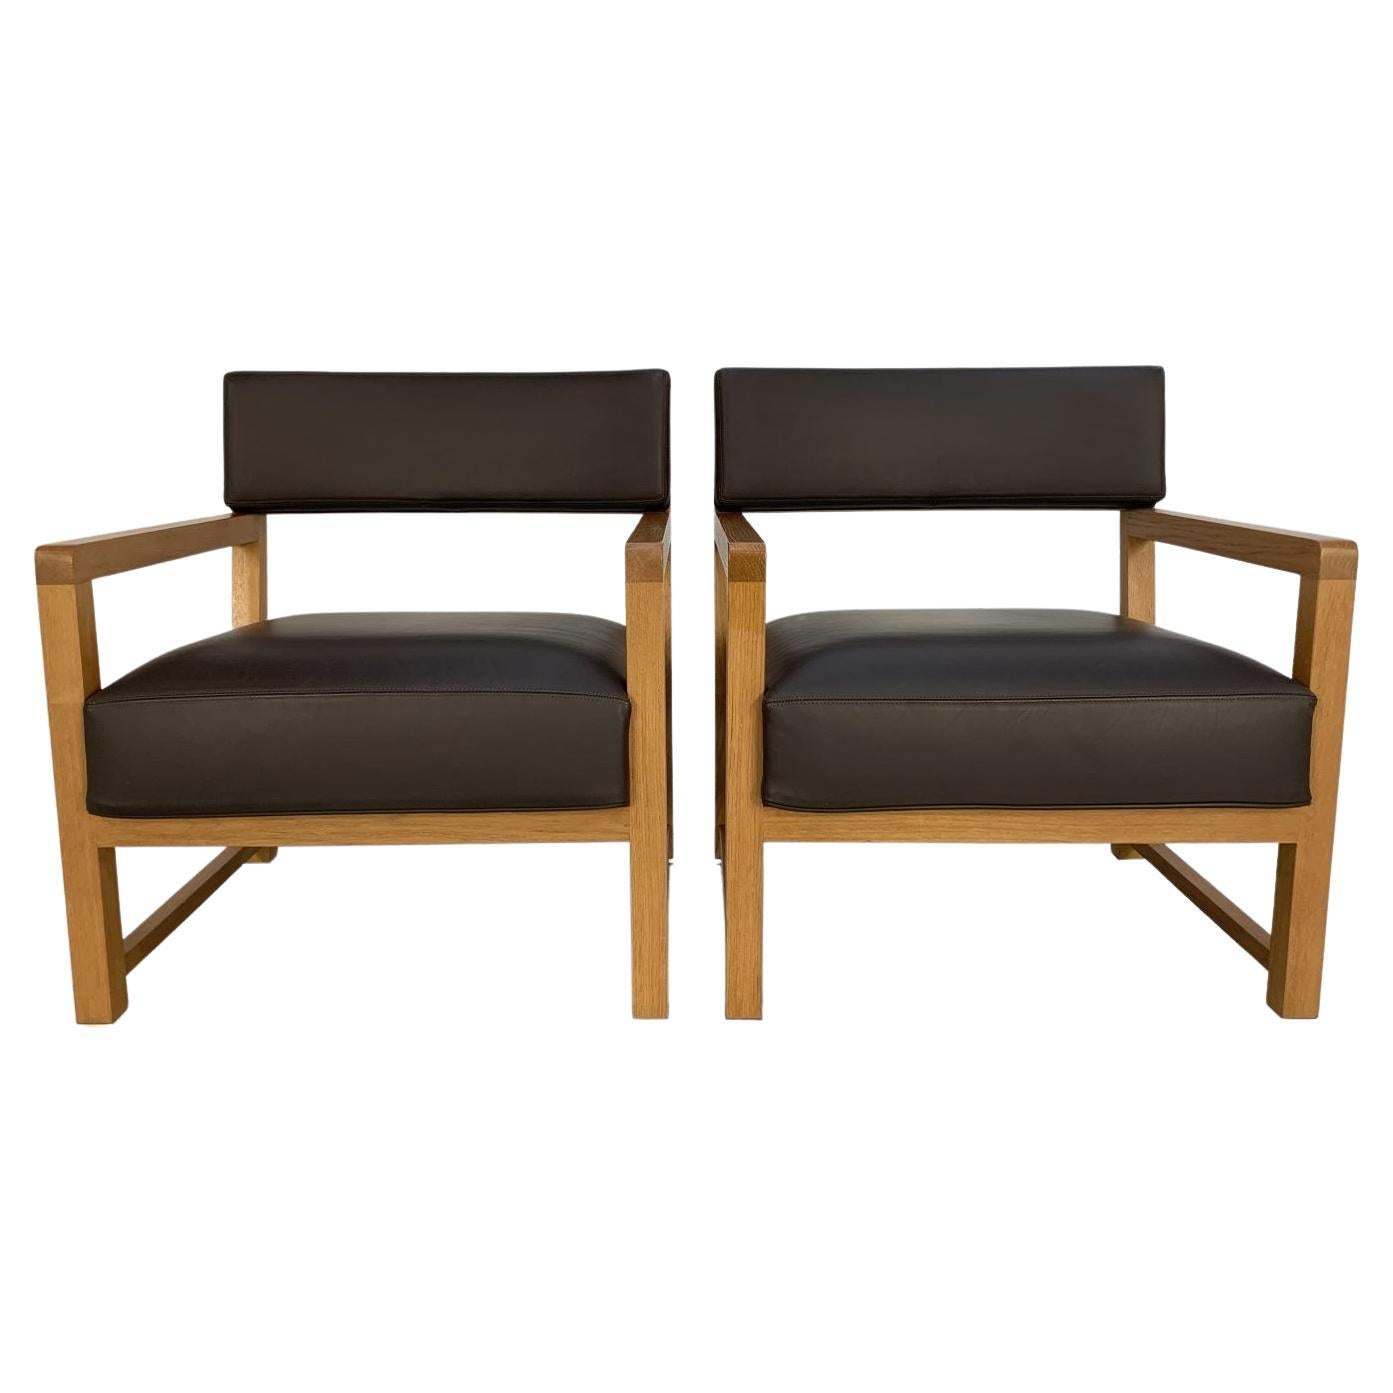 Pair of B&B Italia “Maxalto” Armchairs in “Pelle” Leather and Wood